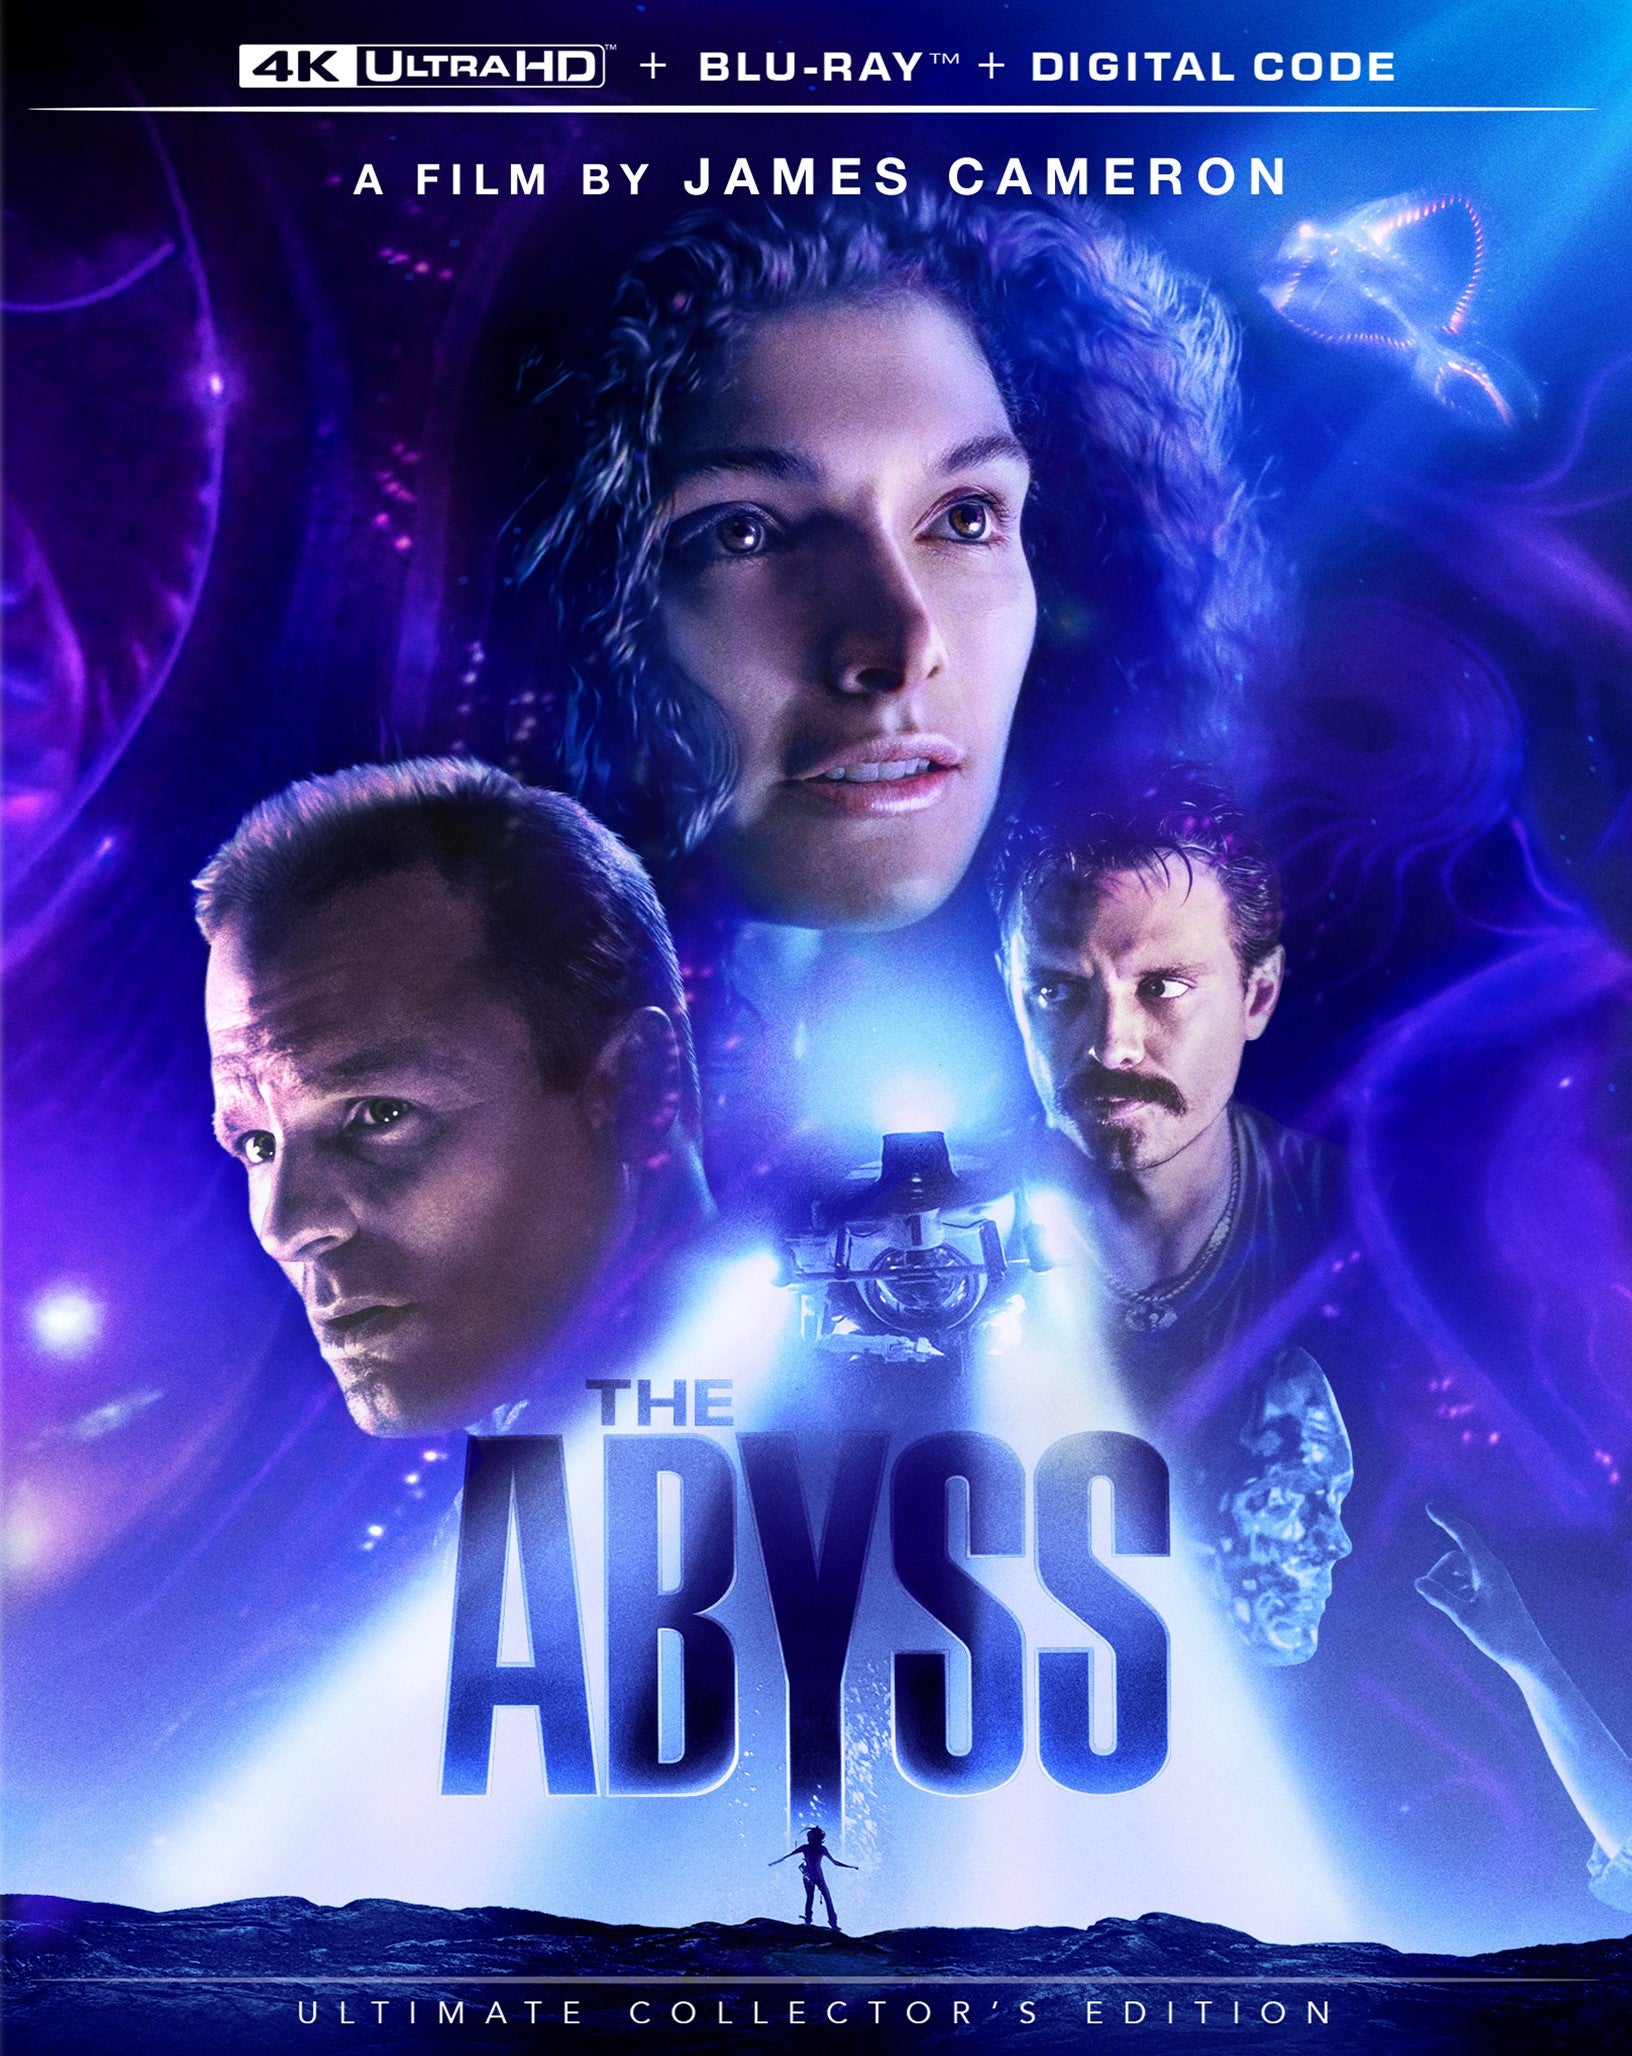 THE ABYSS 4K UHD/BLU-RAY [PRE-ORDER]